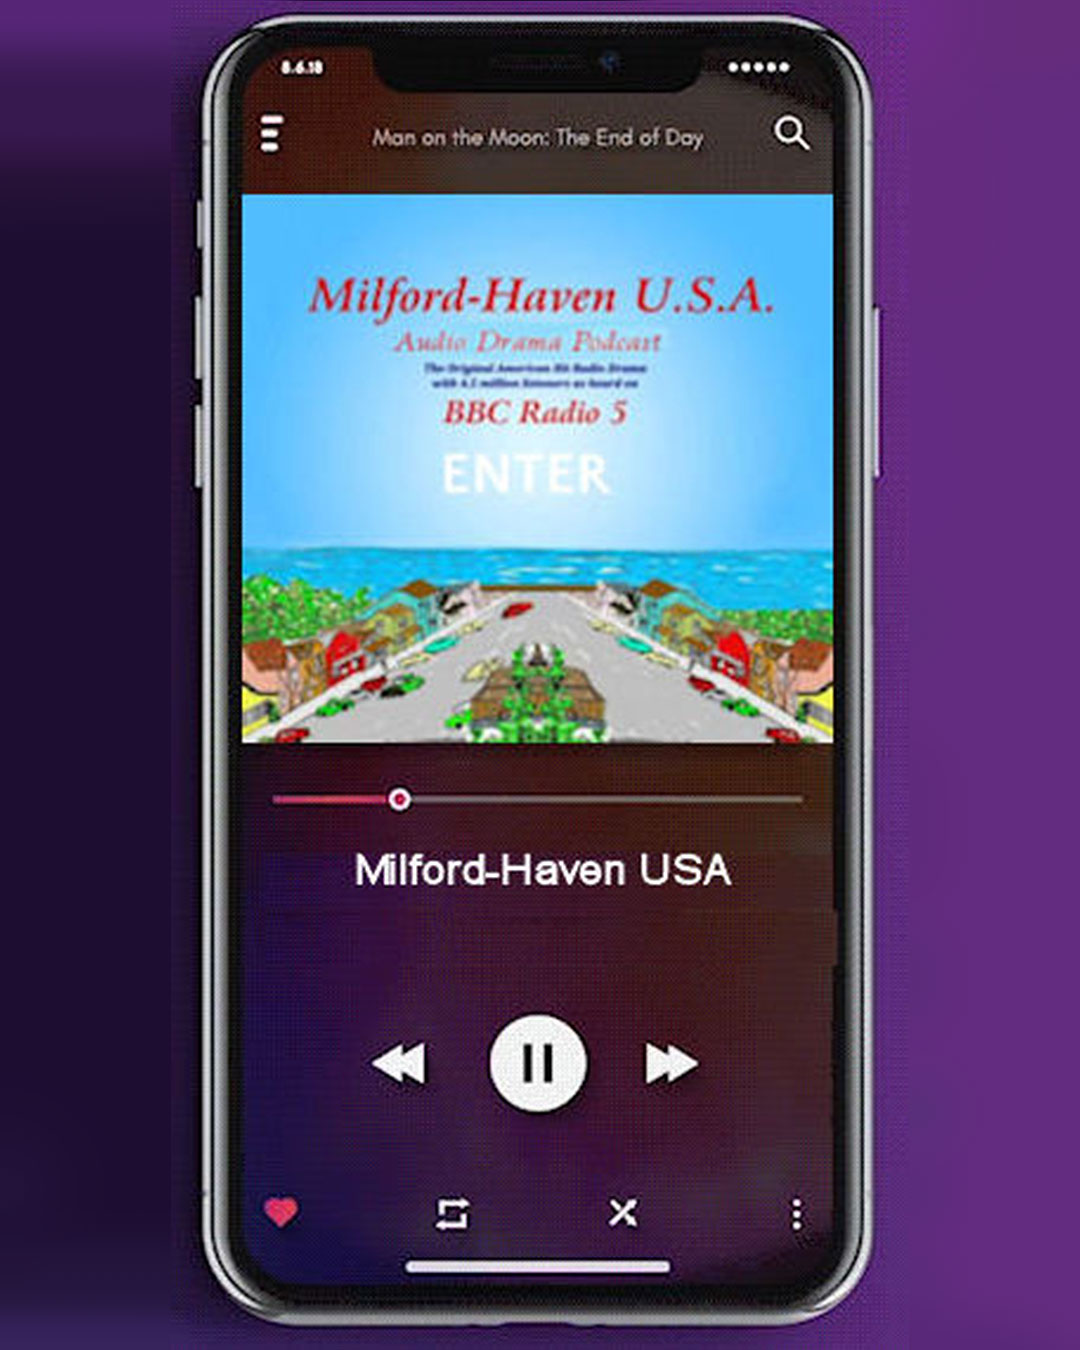 Milford-Haven USA Podcast on phone